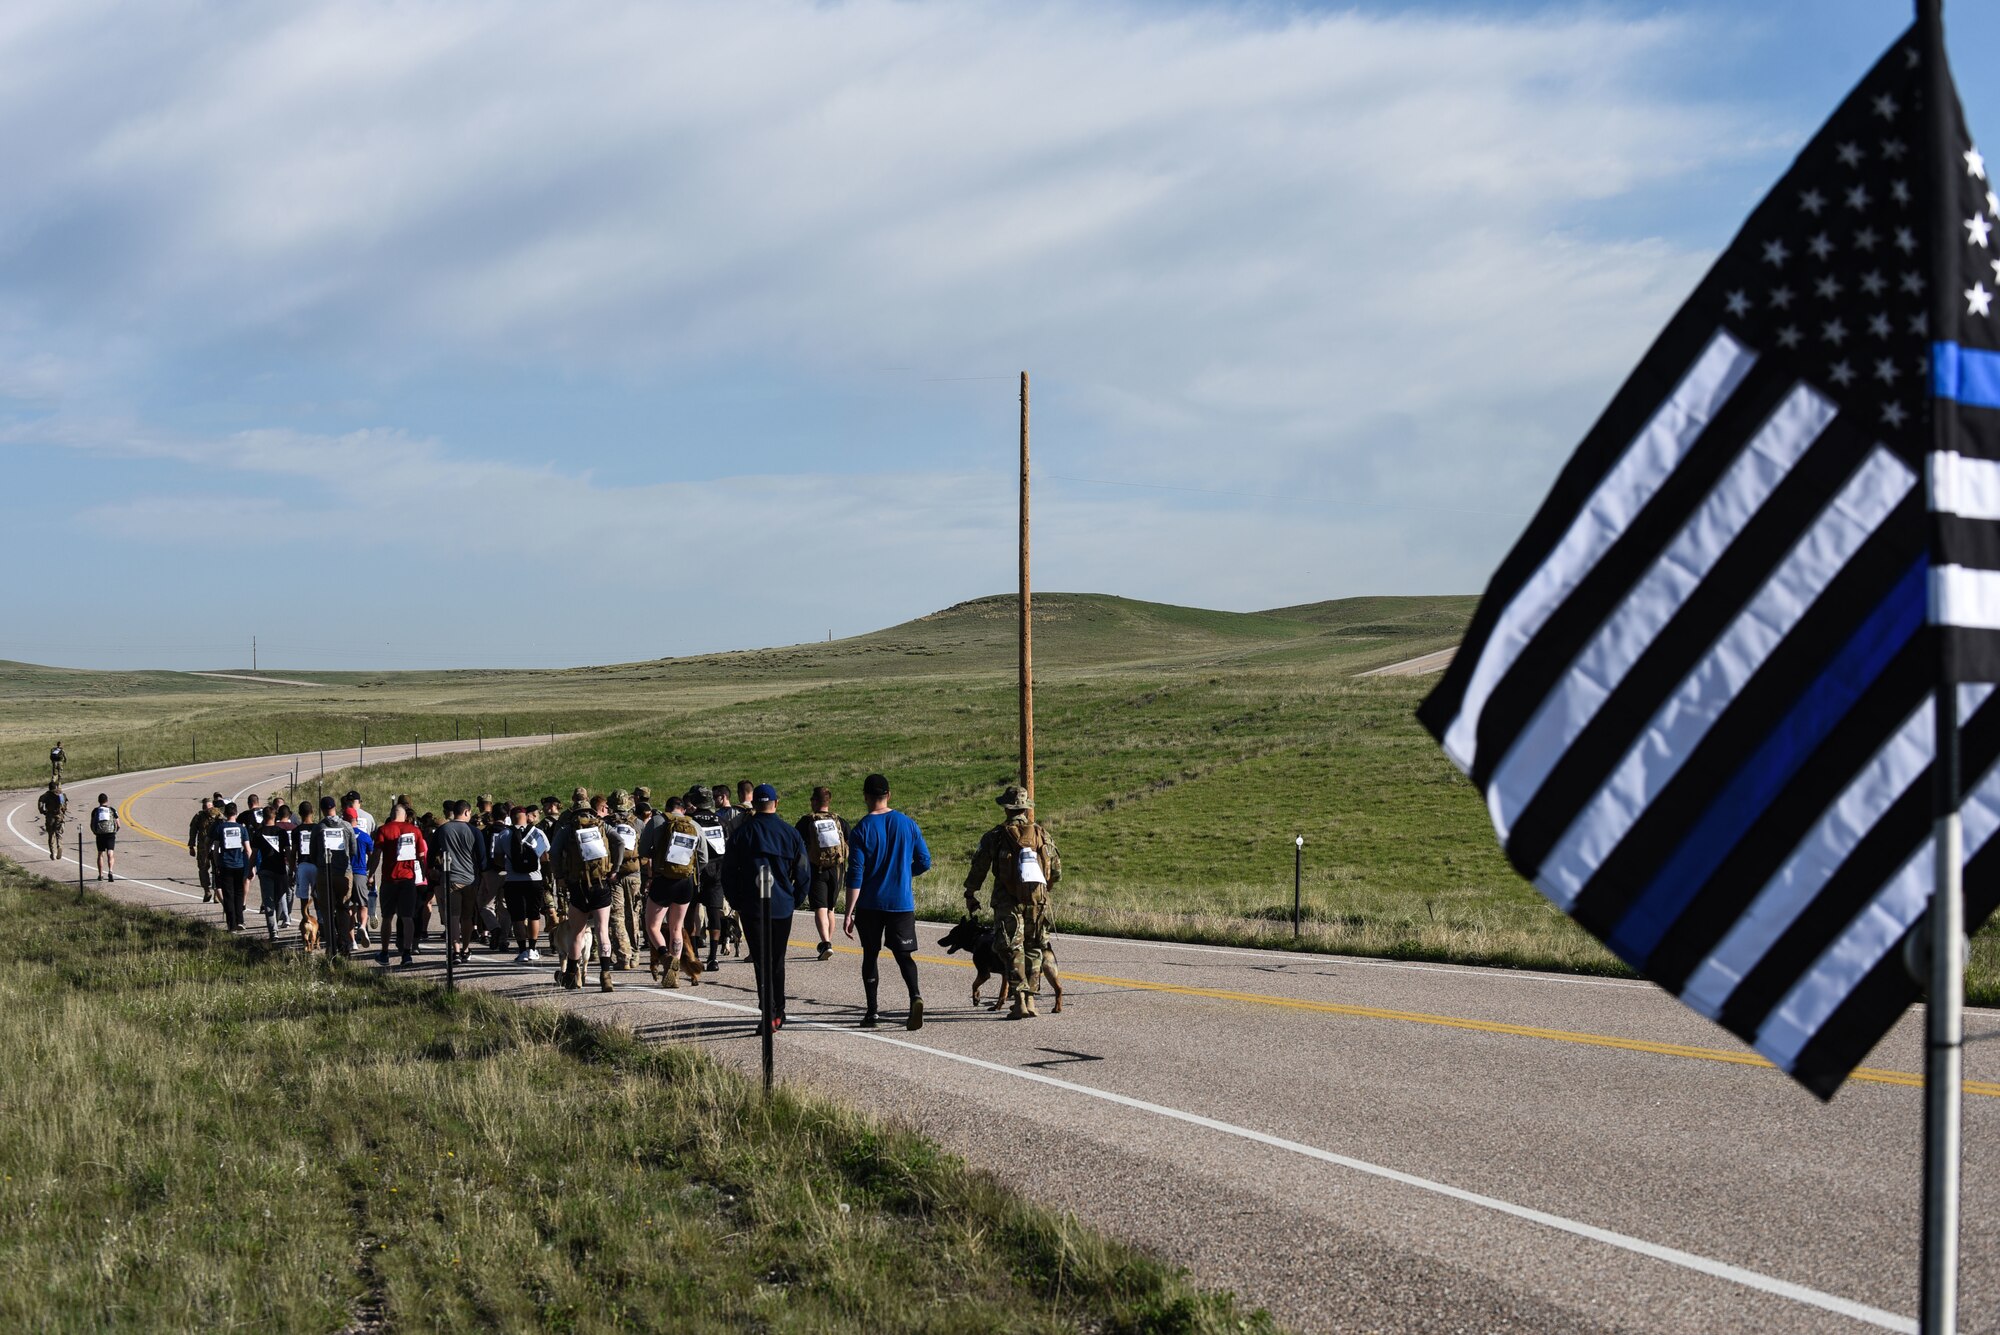 Airmen from the 90th Missile Wing begin the run, walk or ruck for Police Week, May 17, 2018, on F.E. Warren Air Force Base, Wyo. The Police Week run, walk or ruck was a six-mile course around the northern perimeter of the base. To place in the competition each Airmen’s ruck had to weigh 35 pounds. In 1962, President John F. Kennedy signed a proclamation which designated May 15 as Peace Officers Memorial Day and the week in which that date falls as Police Week. People all across the United States participate in various events which honor those who have paid the ultimate sacrifice. (U.S. Air Force photo by Airman 1st Class Braydon Williams)